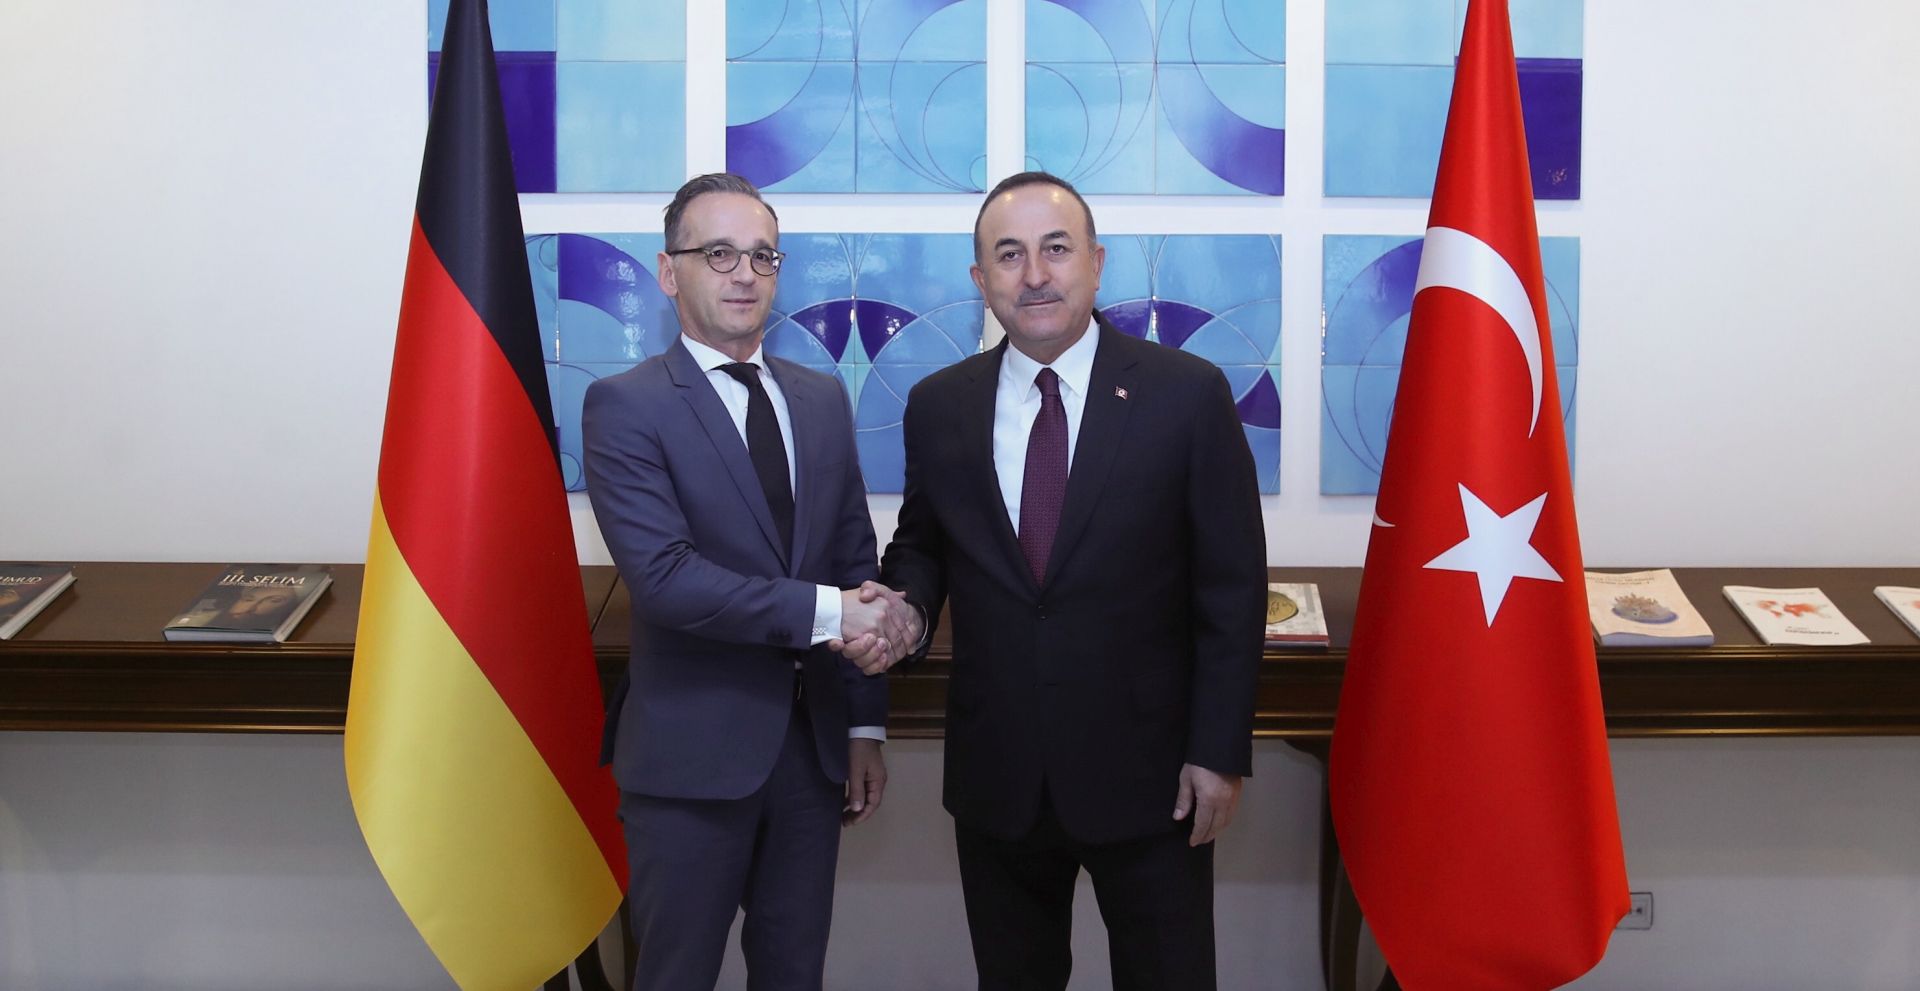 epa07950621 A handout photo made available by the Turkish Foreign Ministry press office shows German Foreign Minister Heiko Maas (L) and Turkish Foreign Minister Mevlut Cavusoglu (R) shake hands during their meeting in Ankara, Turkey, 26 October 2019.  EPA/TURKISH FOREIGN MINISTRY / HANDOUT  HANDOUT EDITORIAL USE ONLY/NO SALES